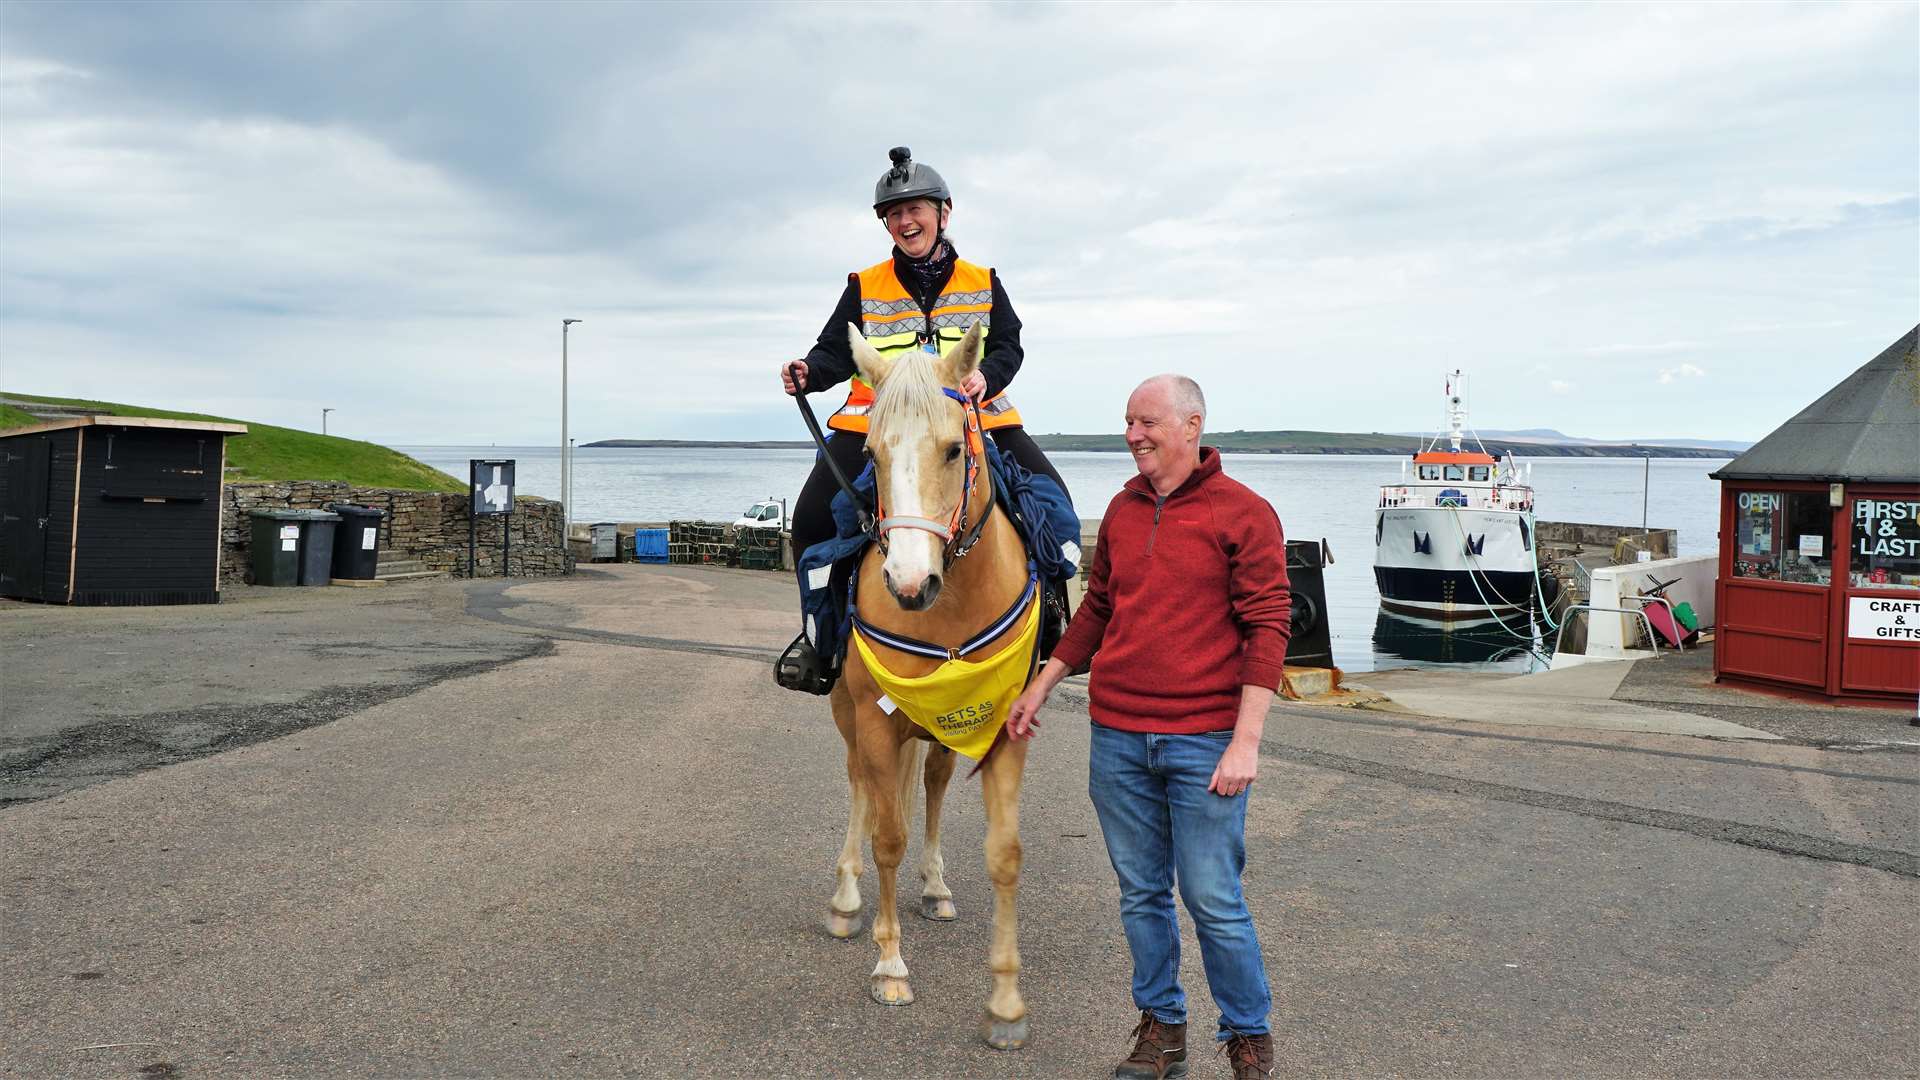 Kate on her beloved six-year-old palomino, Marilyn, and her husband Steve who is providing support for the first 10 days. Picture: DGS